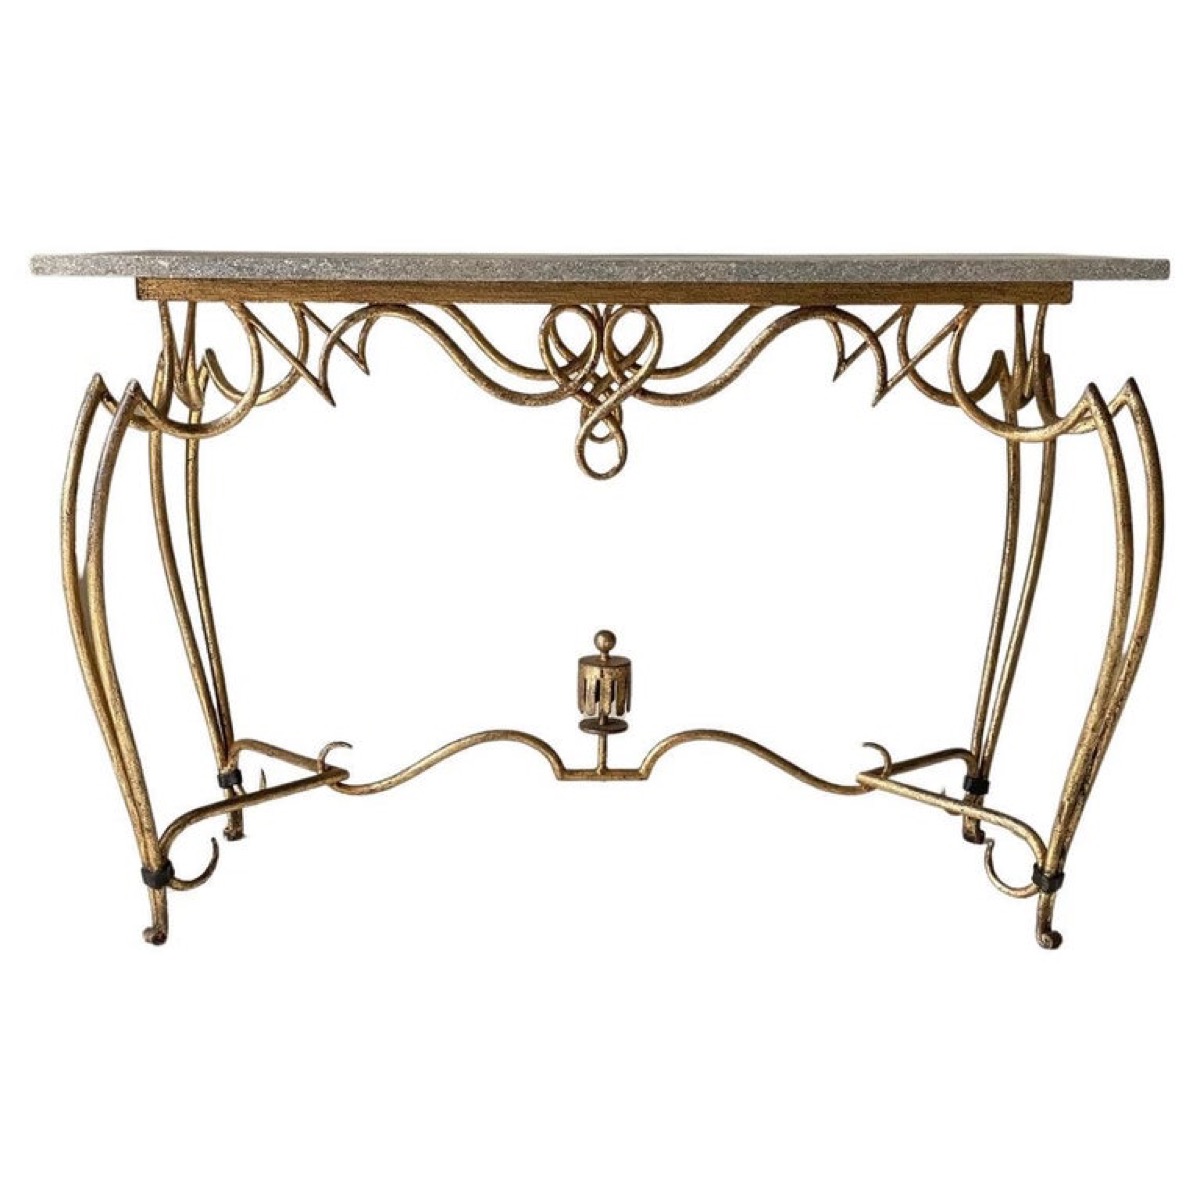 1940s French René Prou attributed Gilt Iron & Limestone Console Table